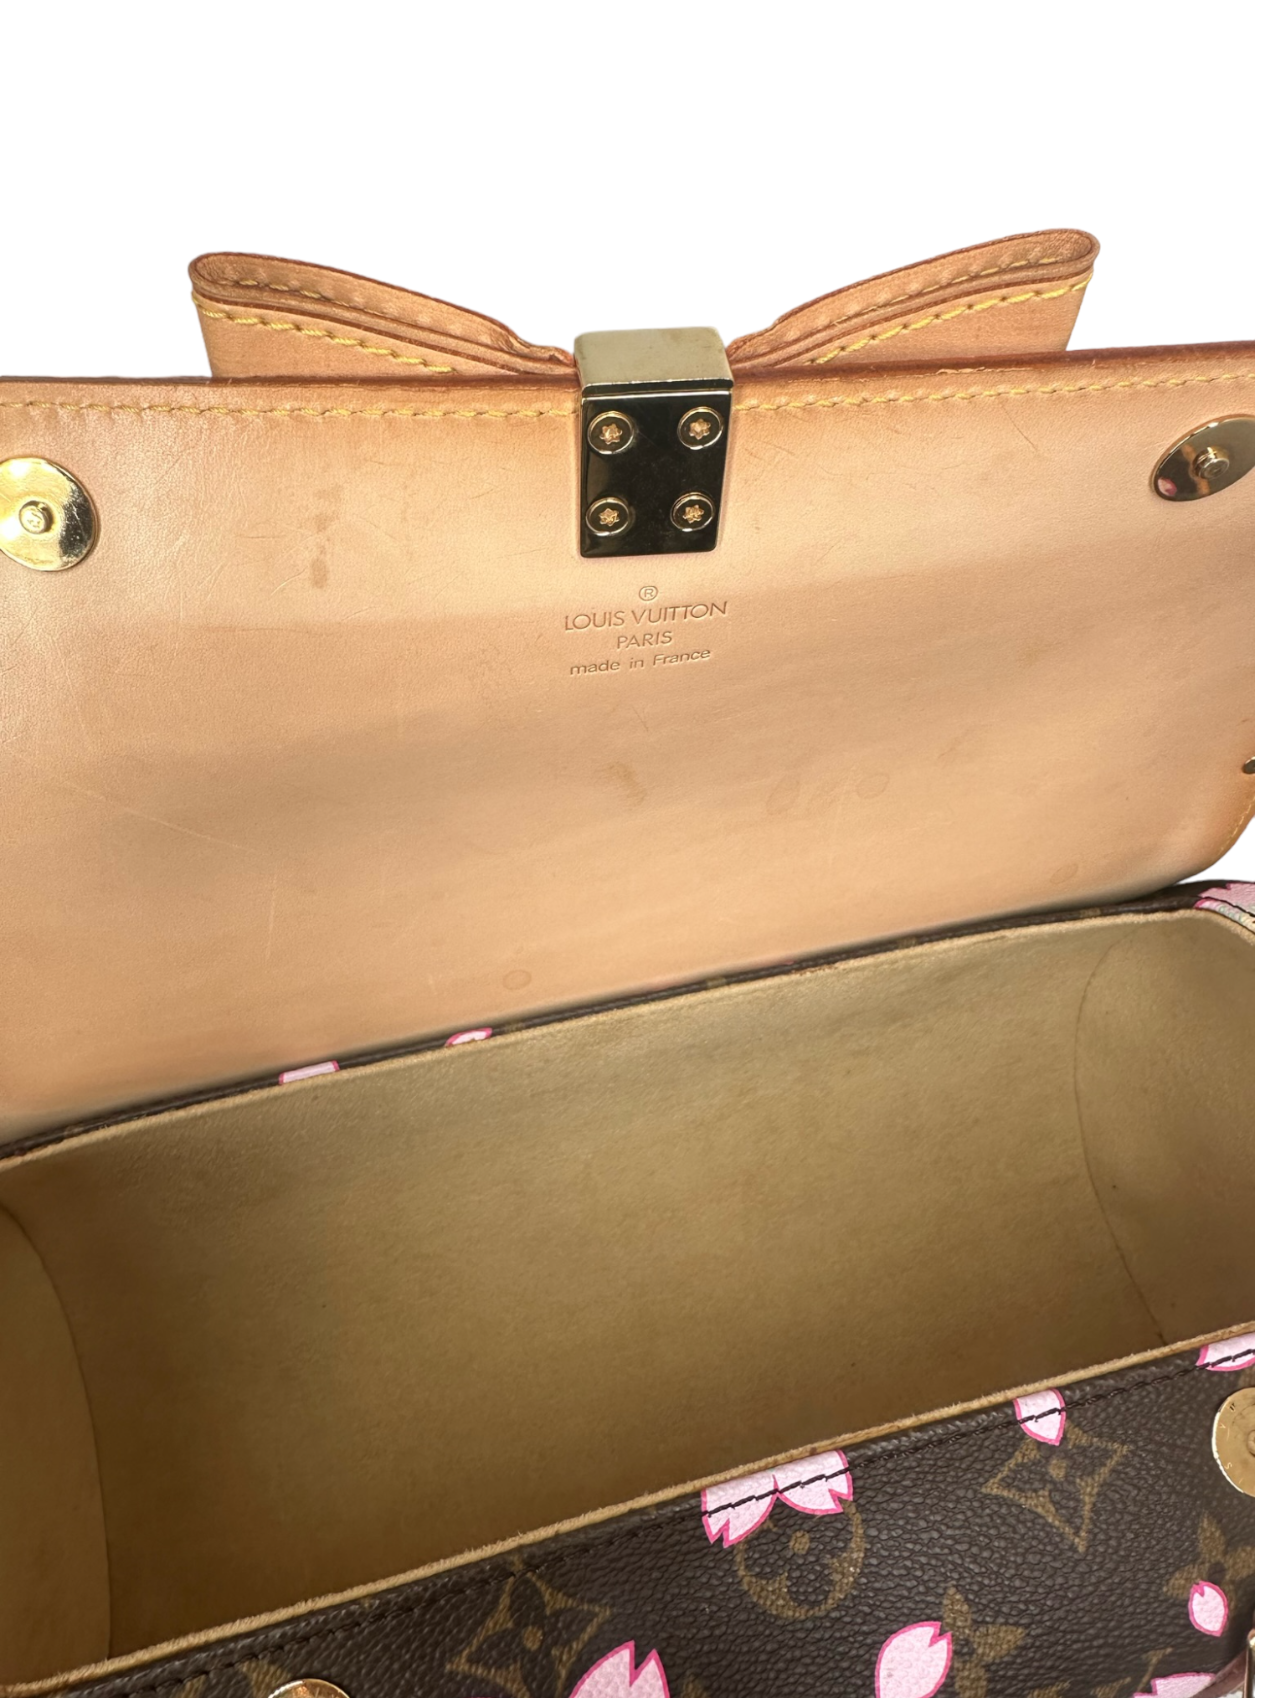 Sold at Auction: Limited Edition Papillon Cherry Blossom Bag, Louis Vuitton